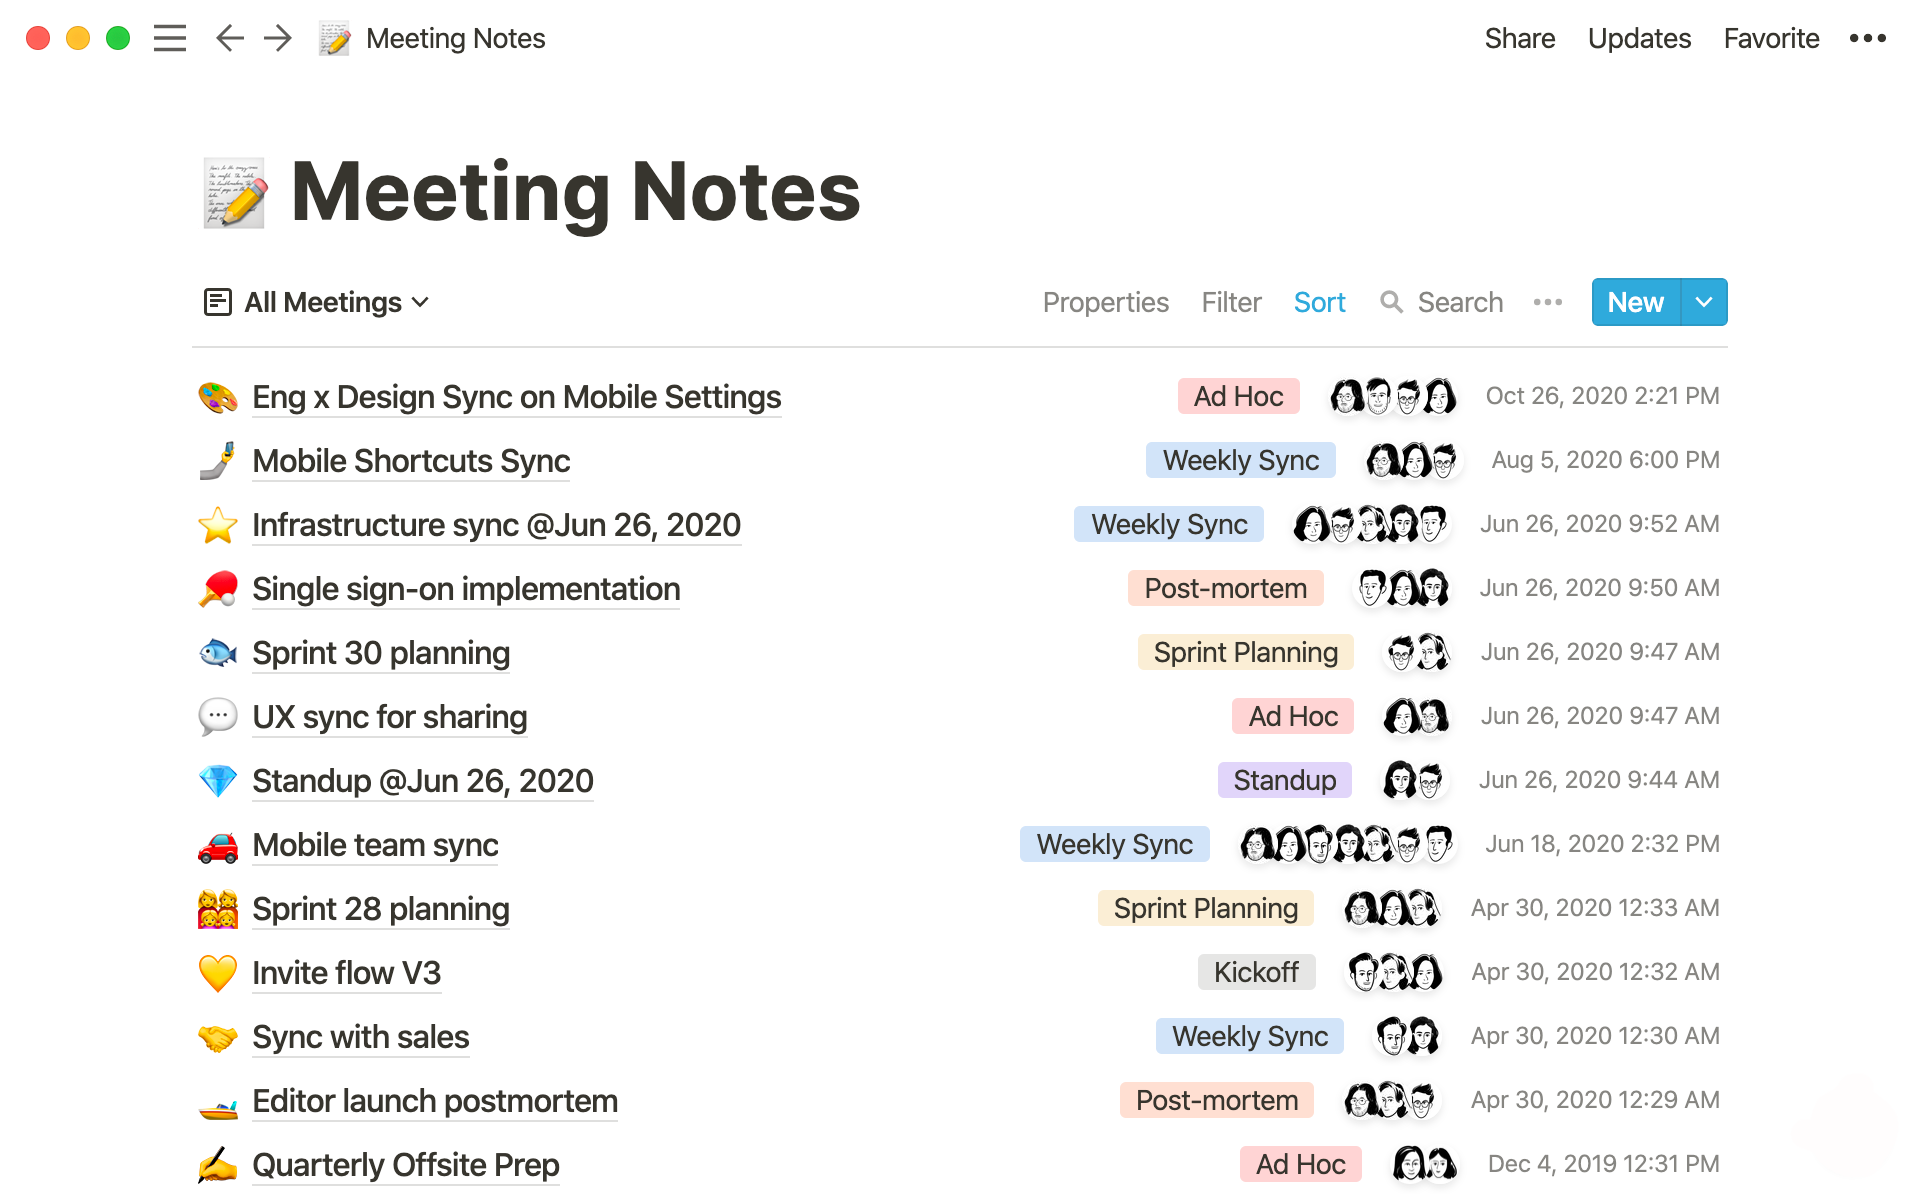 Your team’s meeting notes can be part of your knowledge management system too.